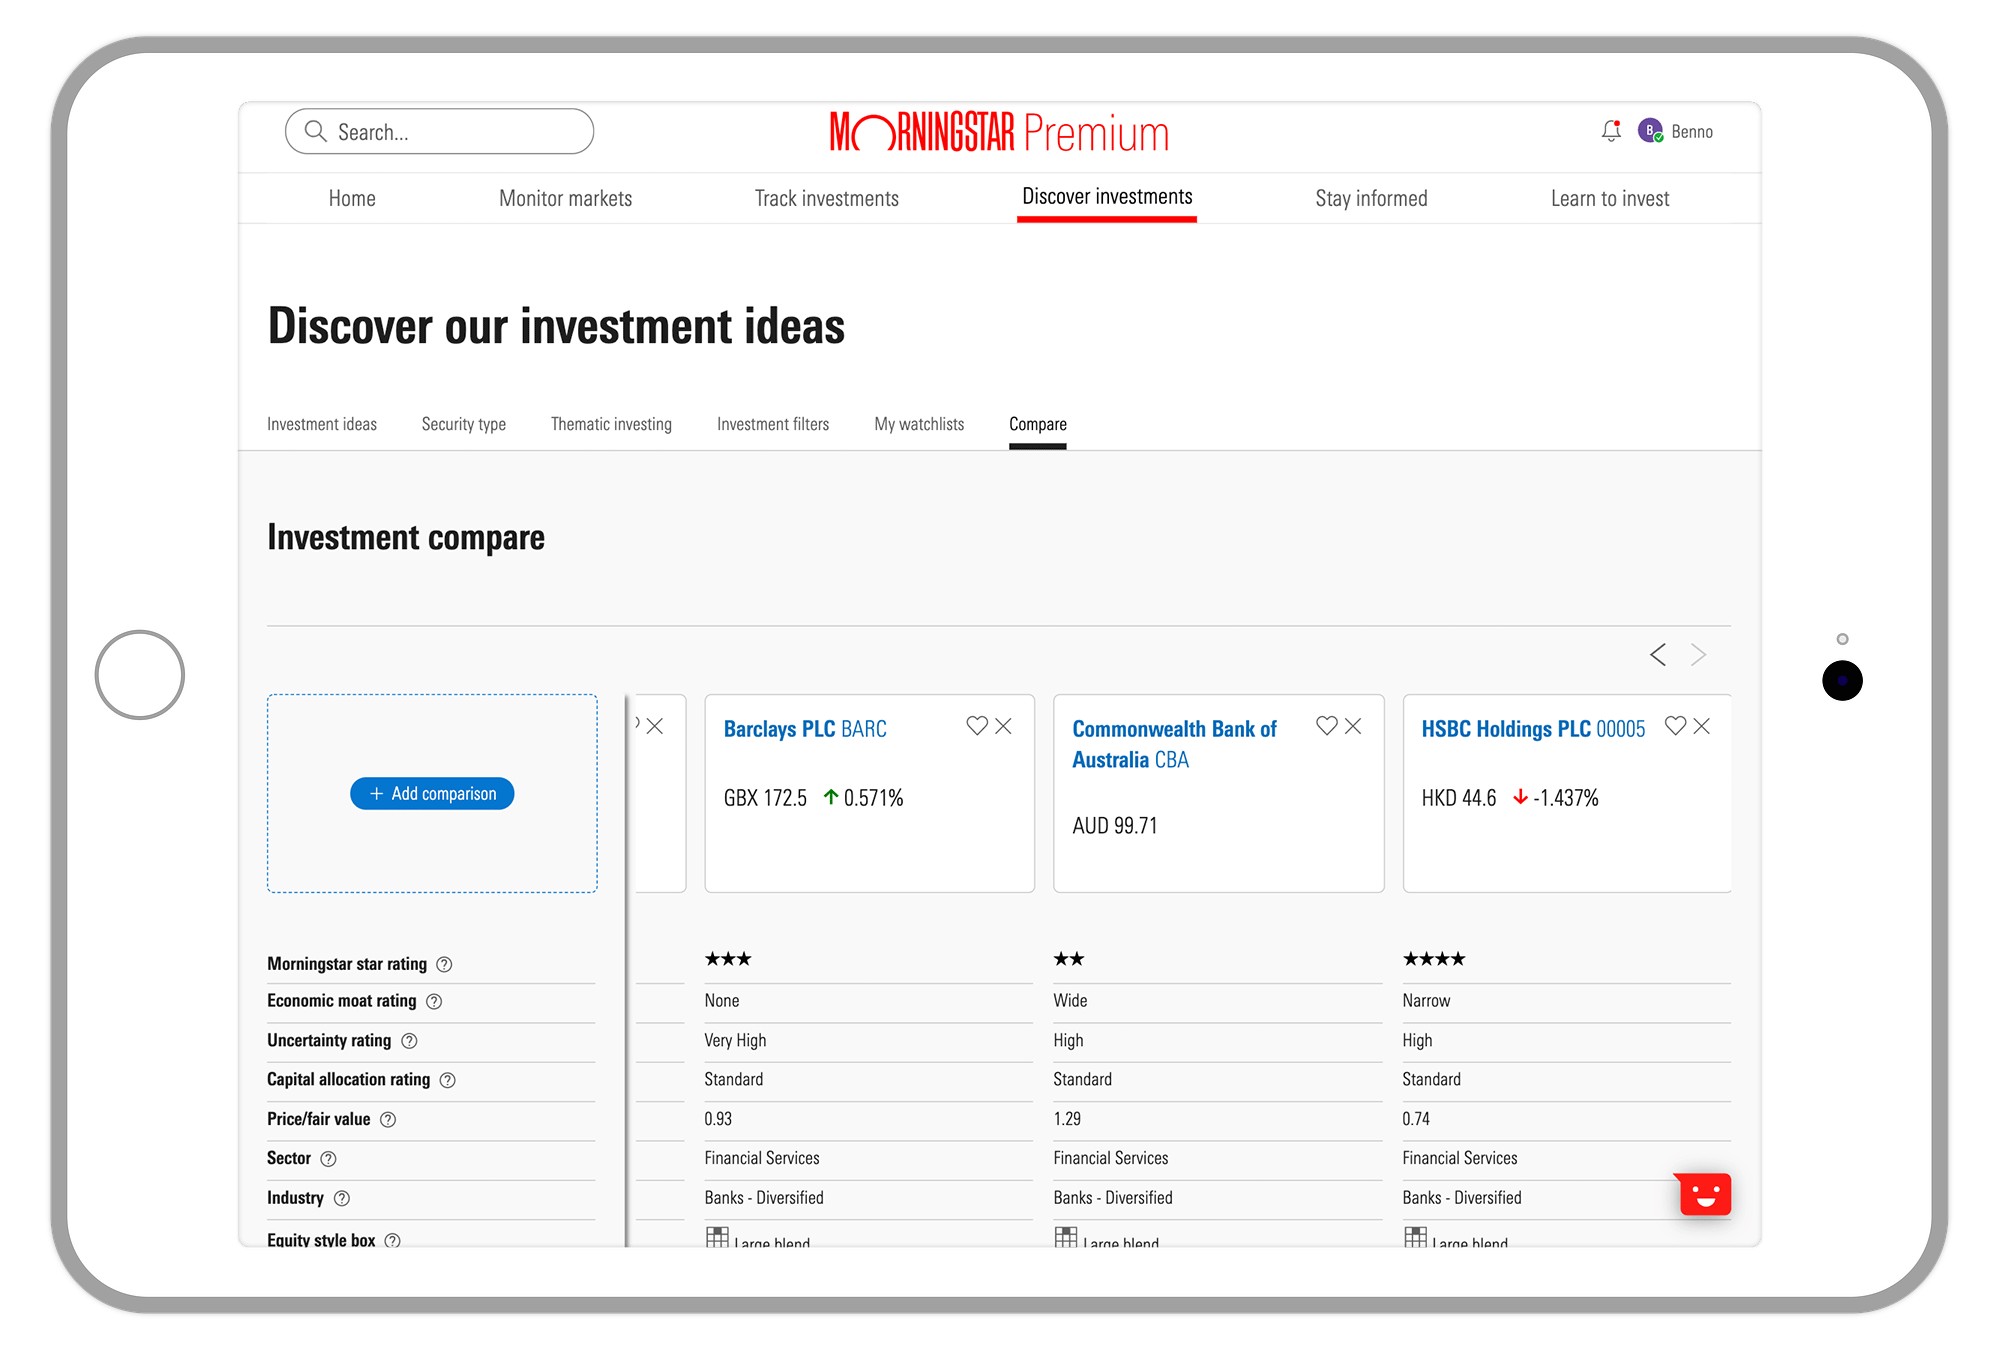 Try Morningstar's Investment Compare tool